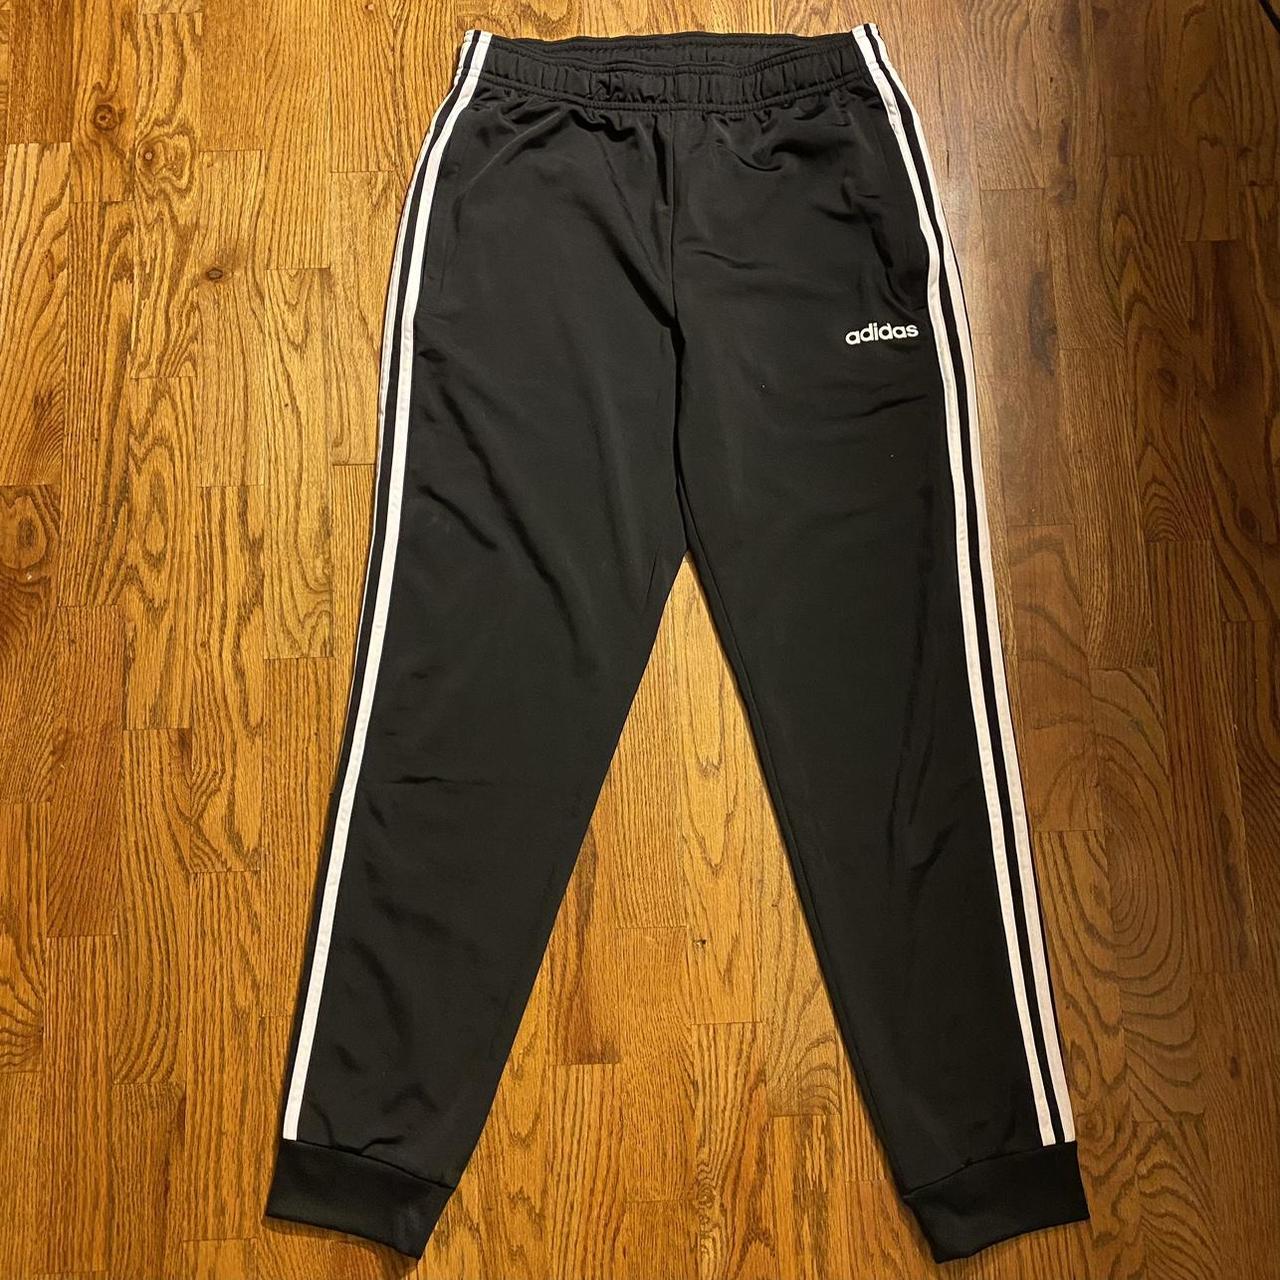 Adidas Men's White and Black Joggers-tracksuits